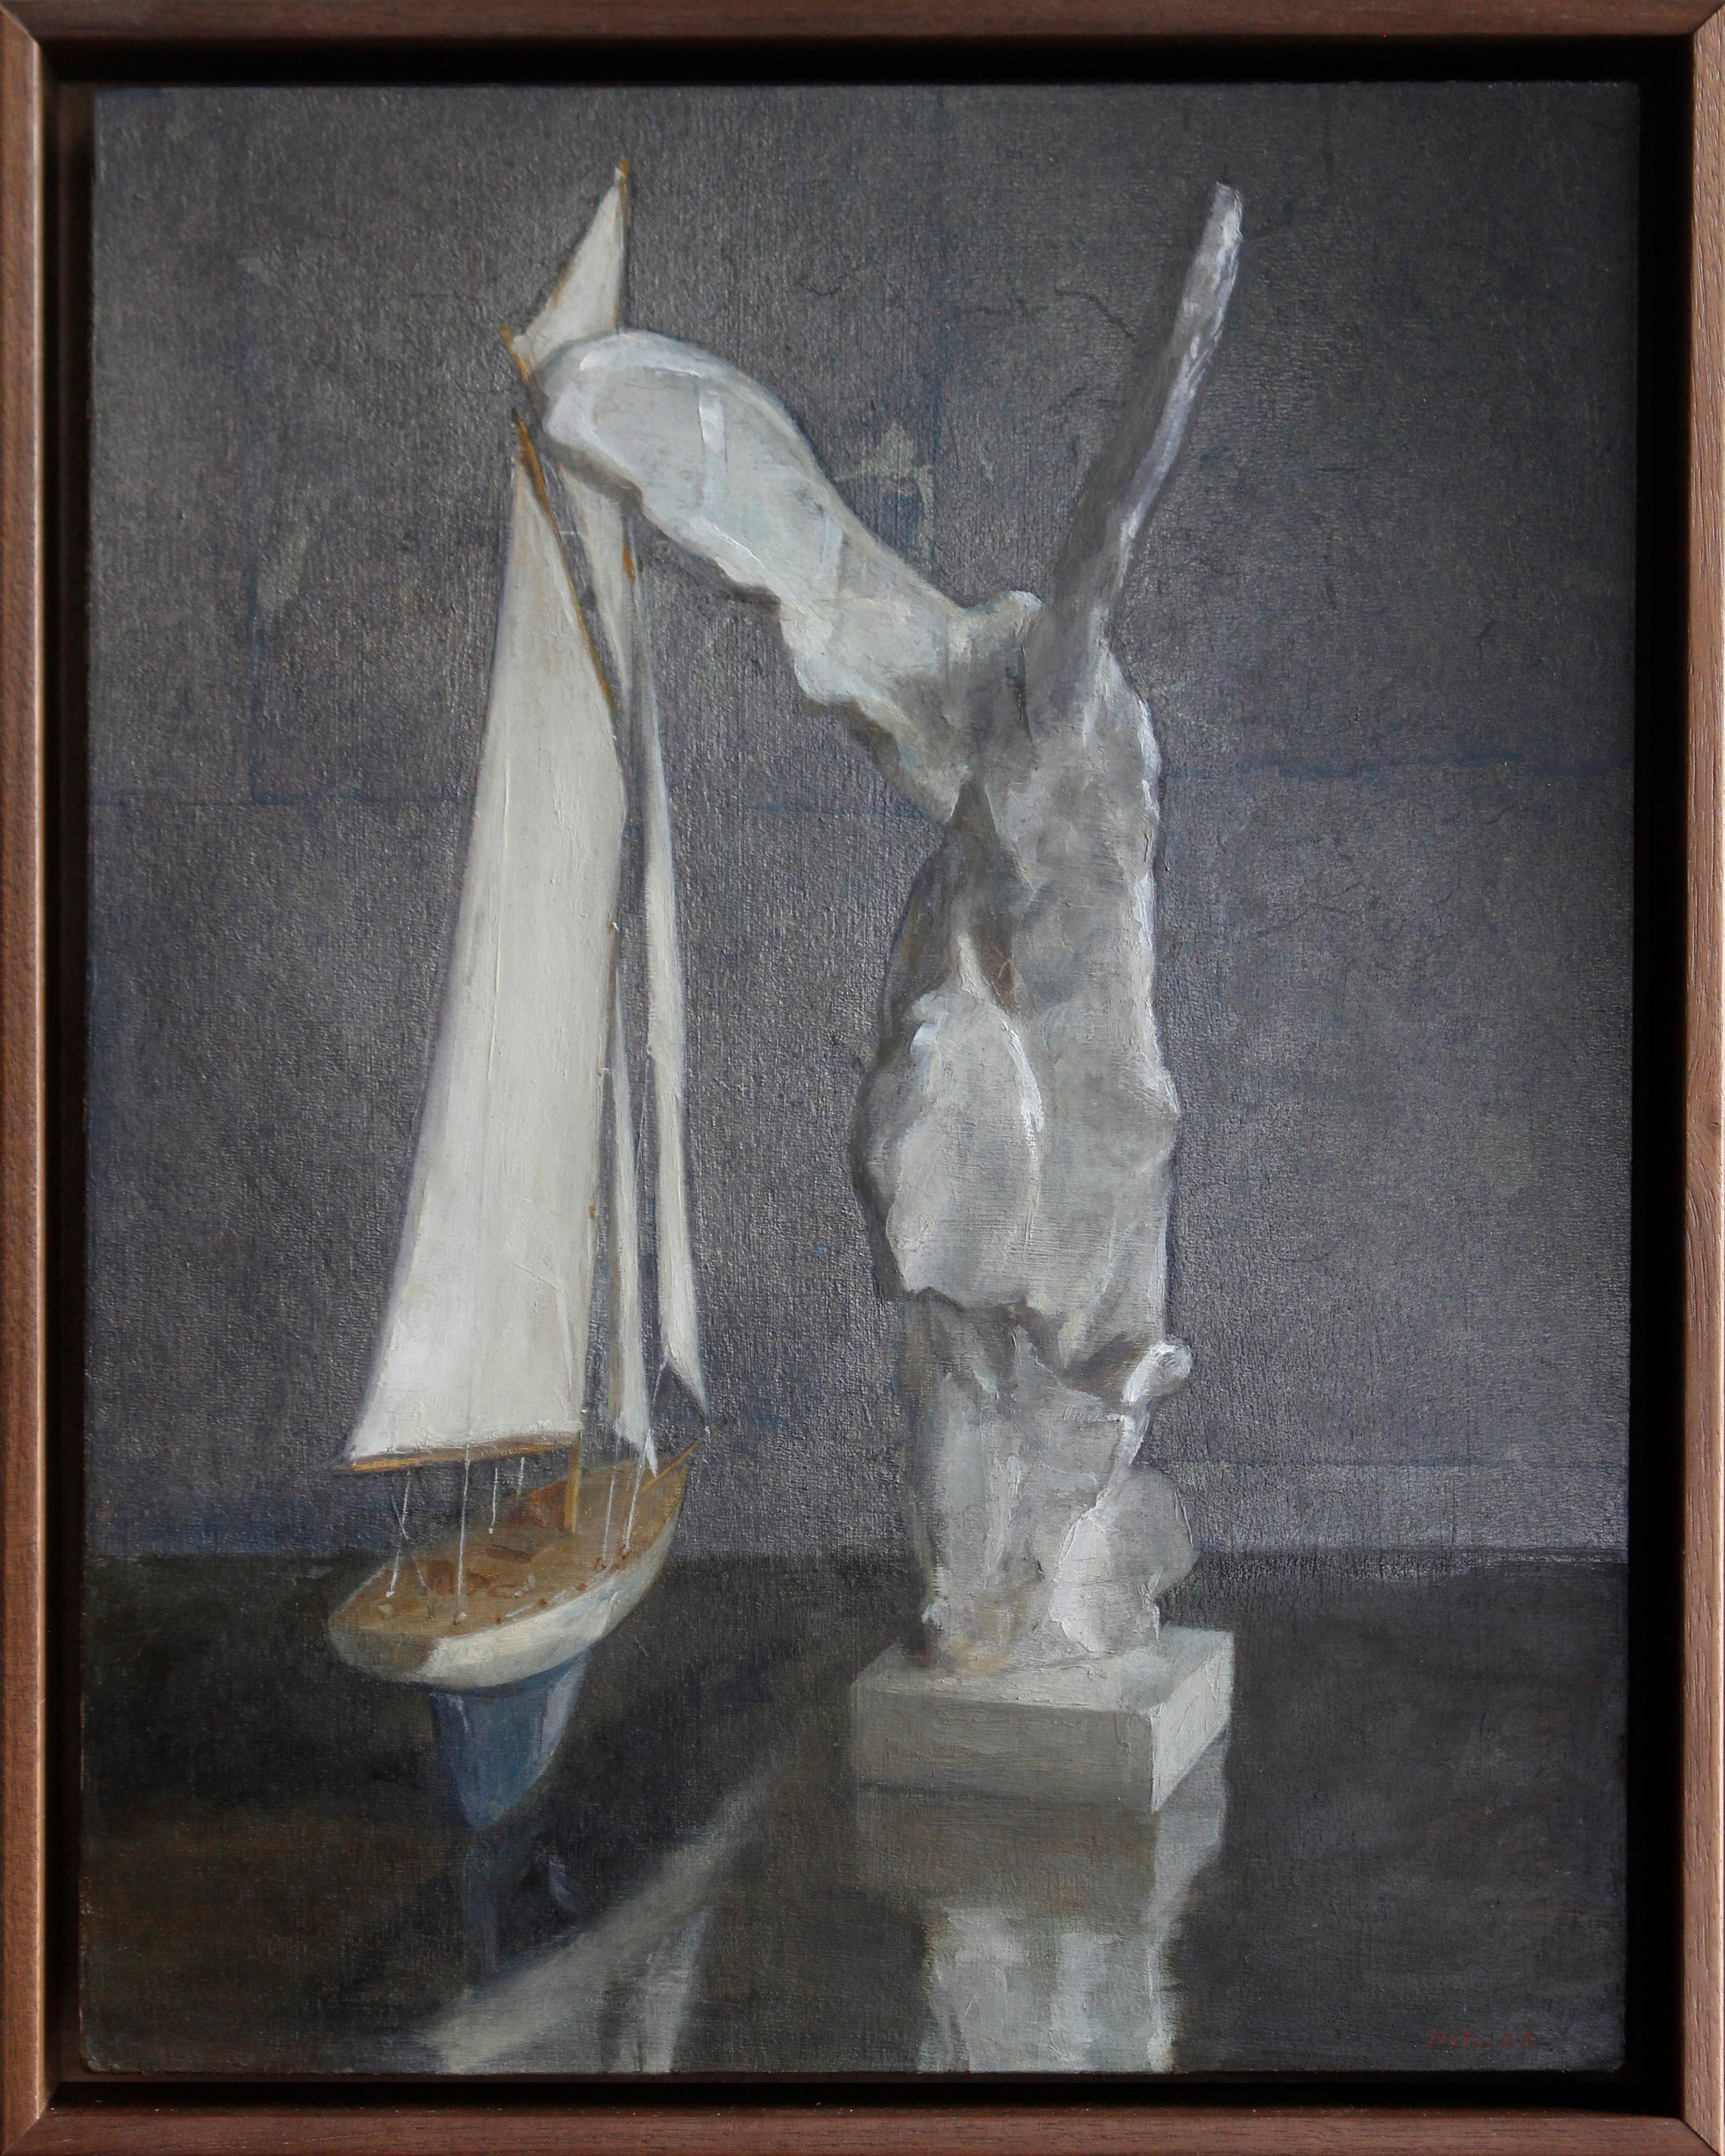 Sail and Nike - Still Life with Toy Boat and Winged Victory, Silver Leaf and Oil